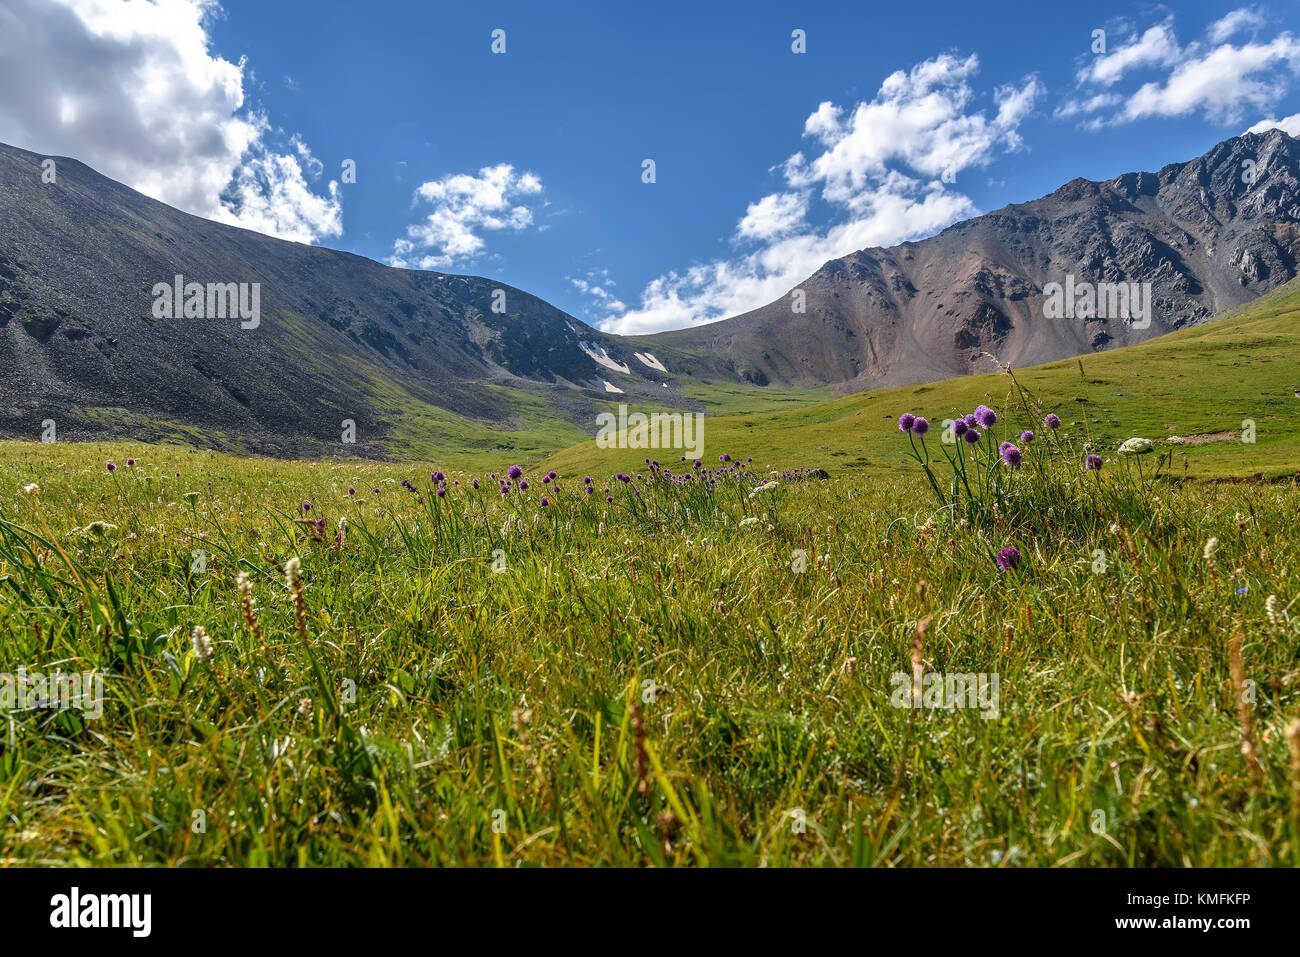 Violet wildflowers Allium schoenoprasum on a bright green alpine meadow in the highlands against the backdrop of mountains and blue sky with clouds Stock Photo